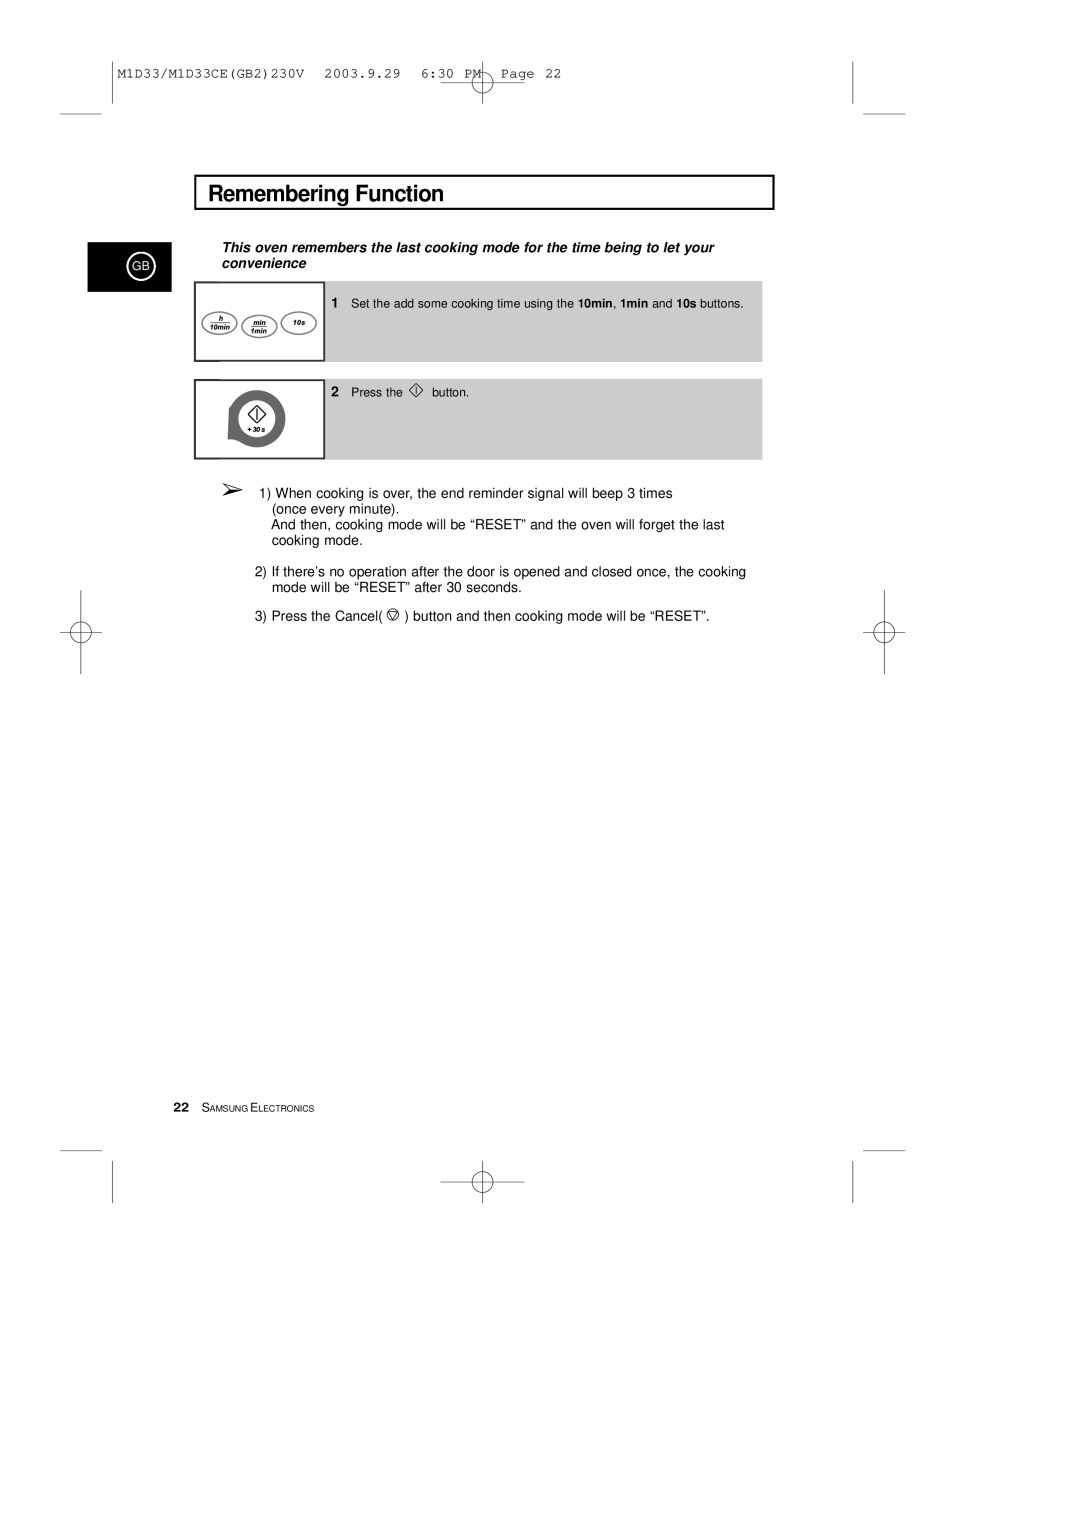 Samsung M1D33CE manual Remembering Function, convenience 